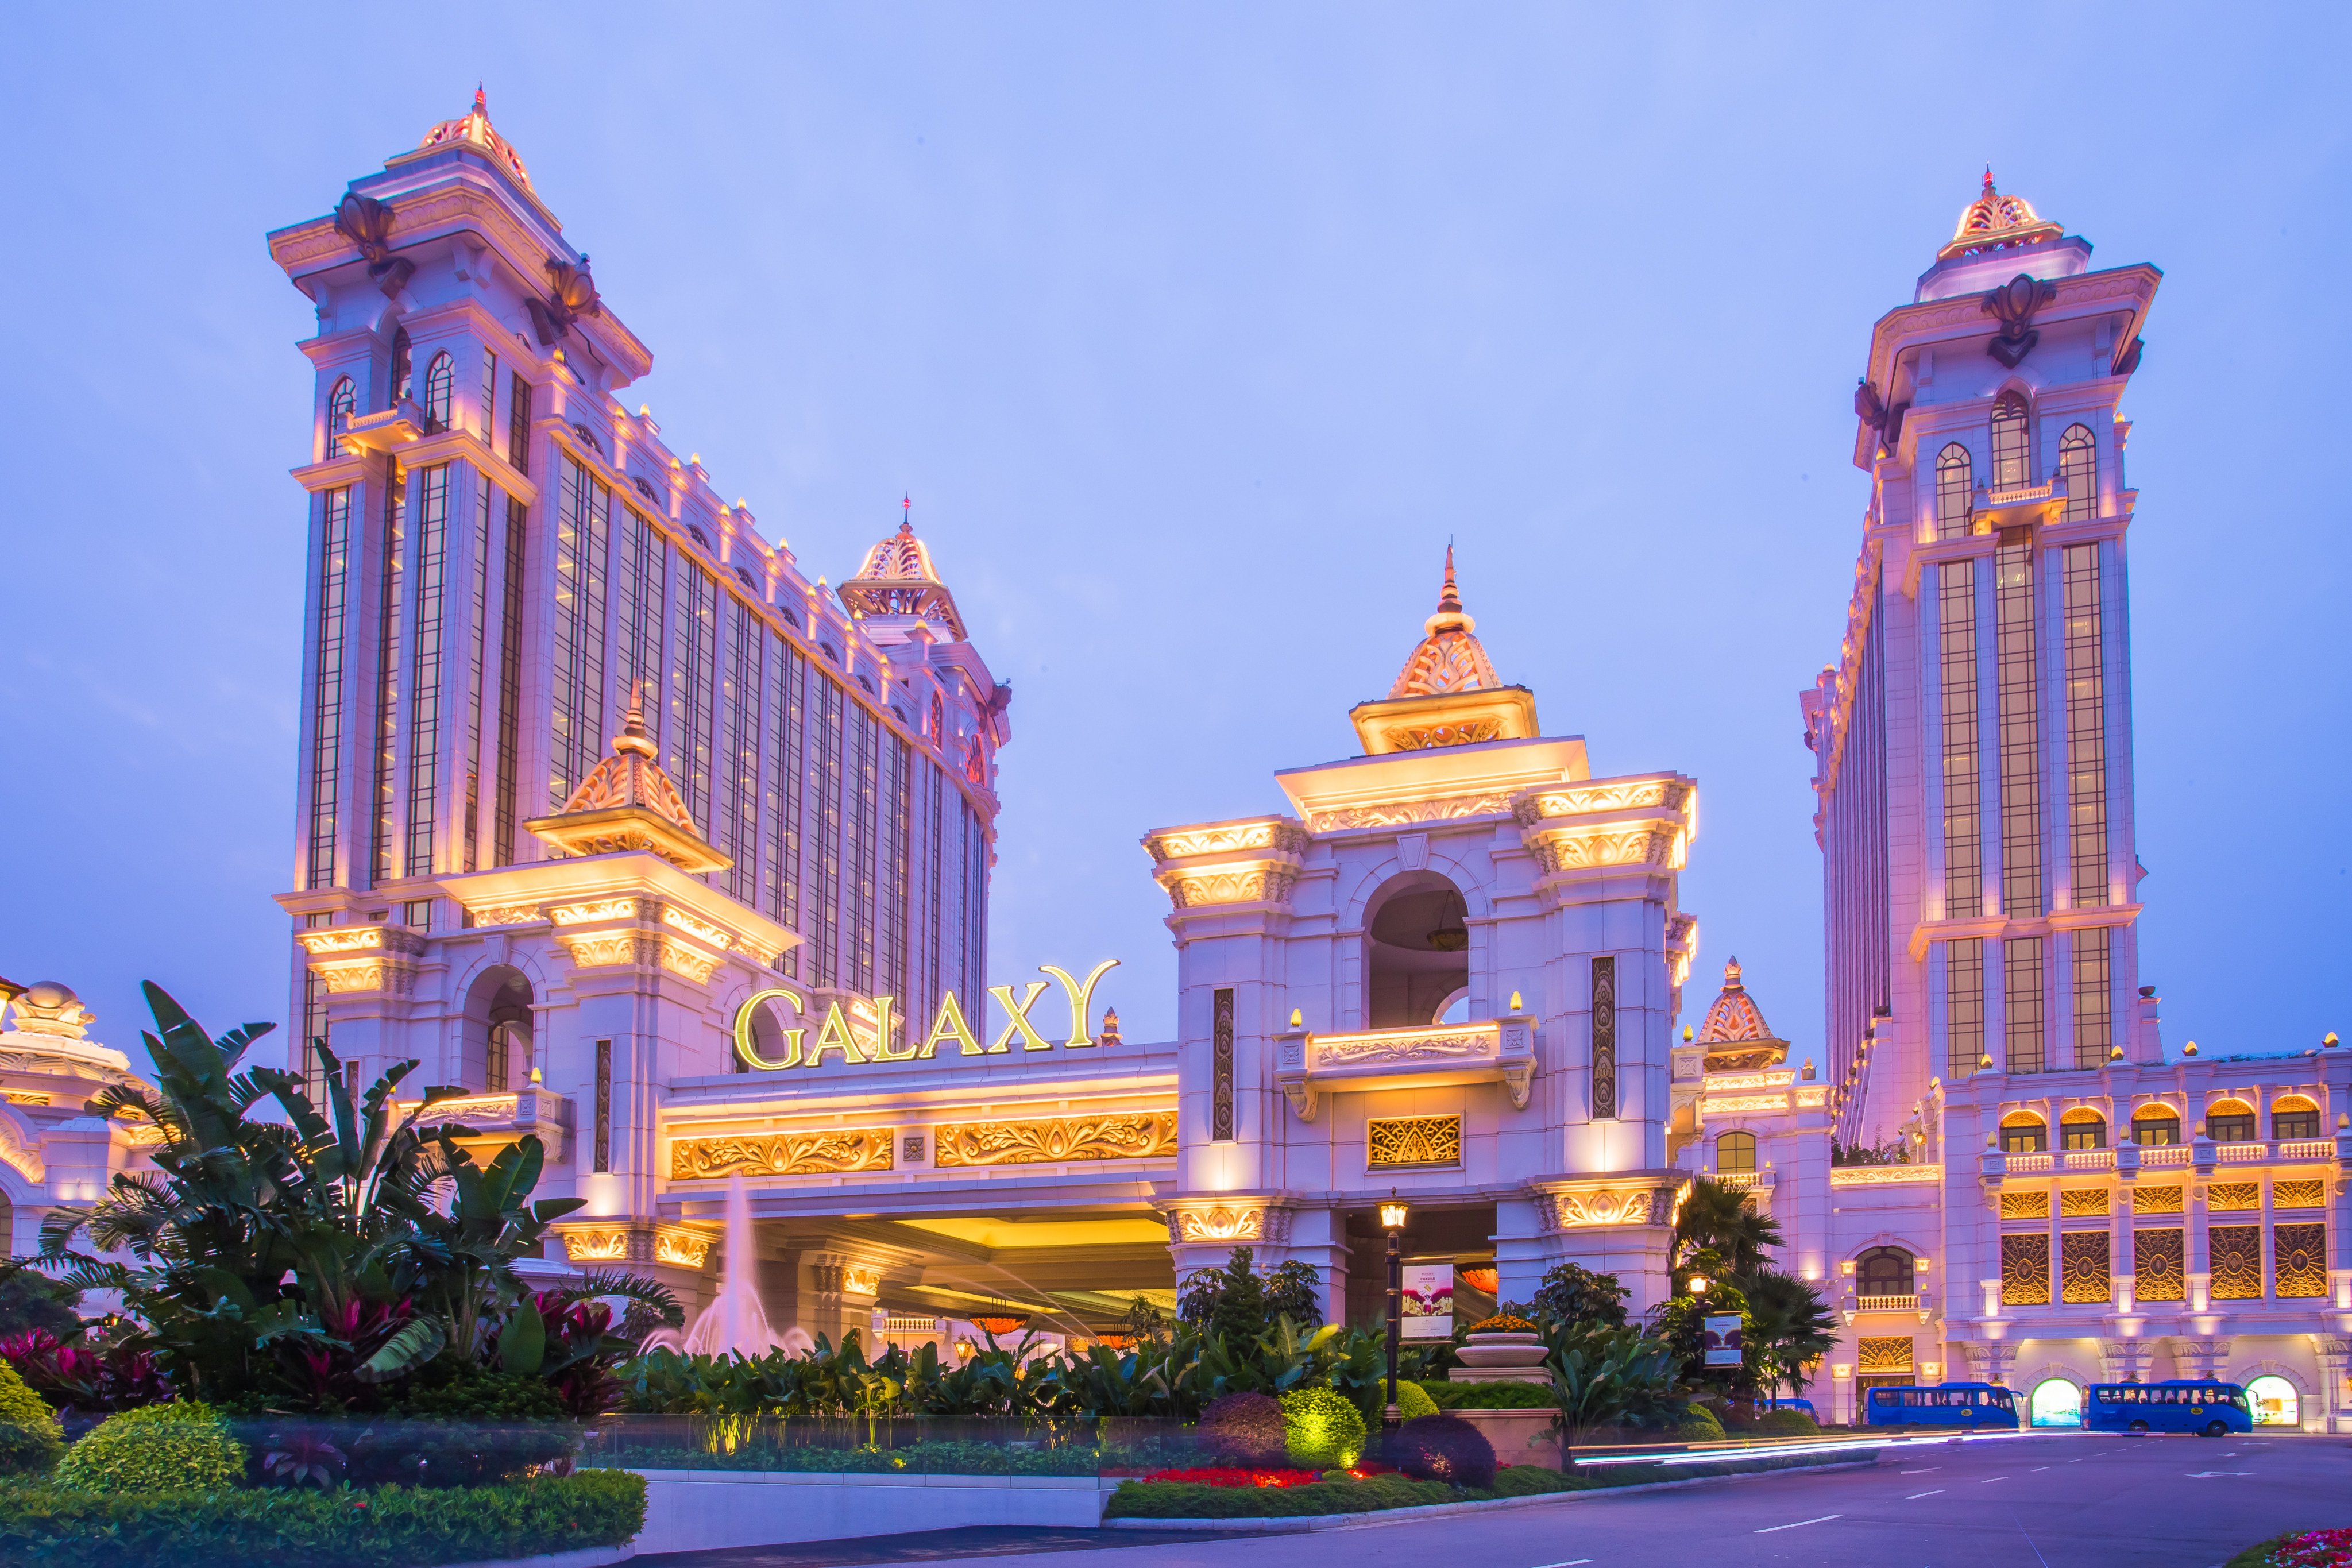 The Macau Galaxy casino. The casino operator has seen a revival in its fortunes following the return of tourists. Photo: Shutterstock